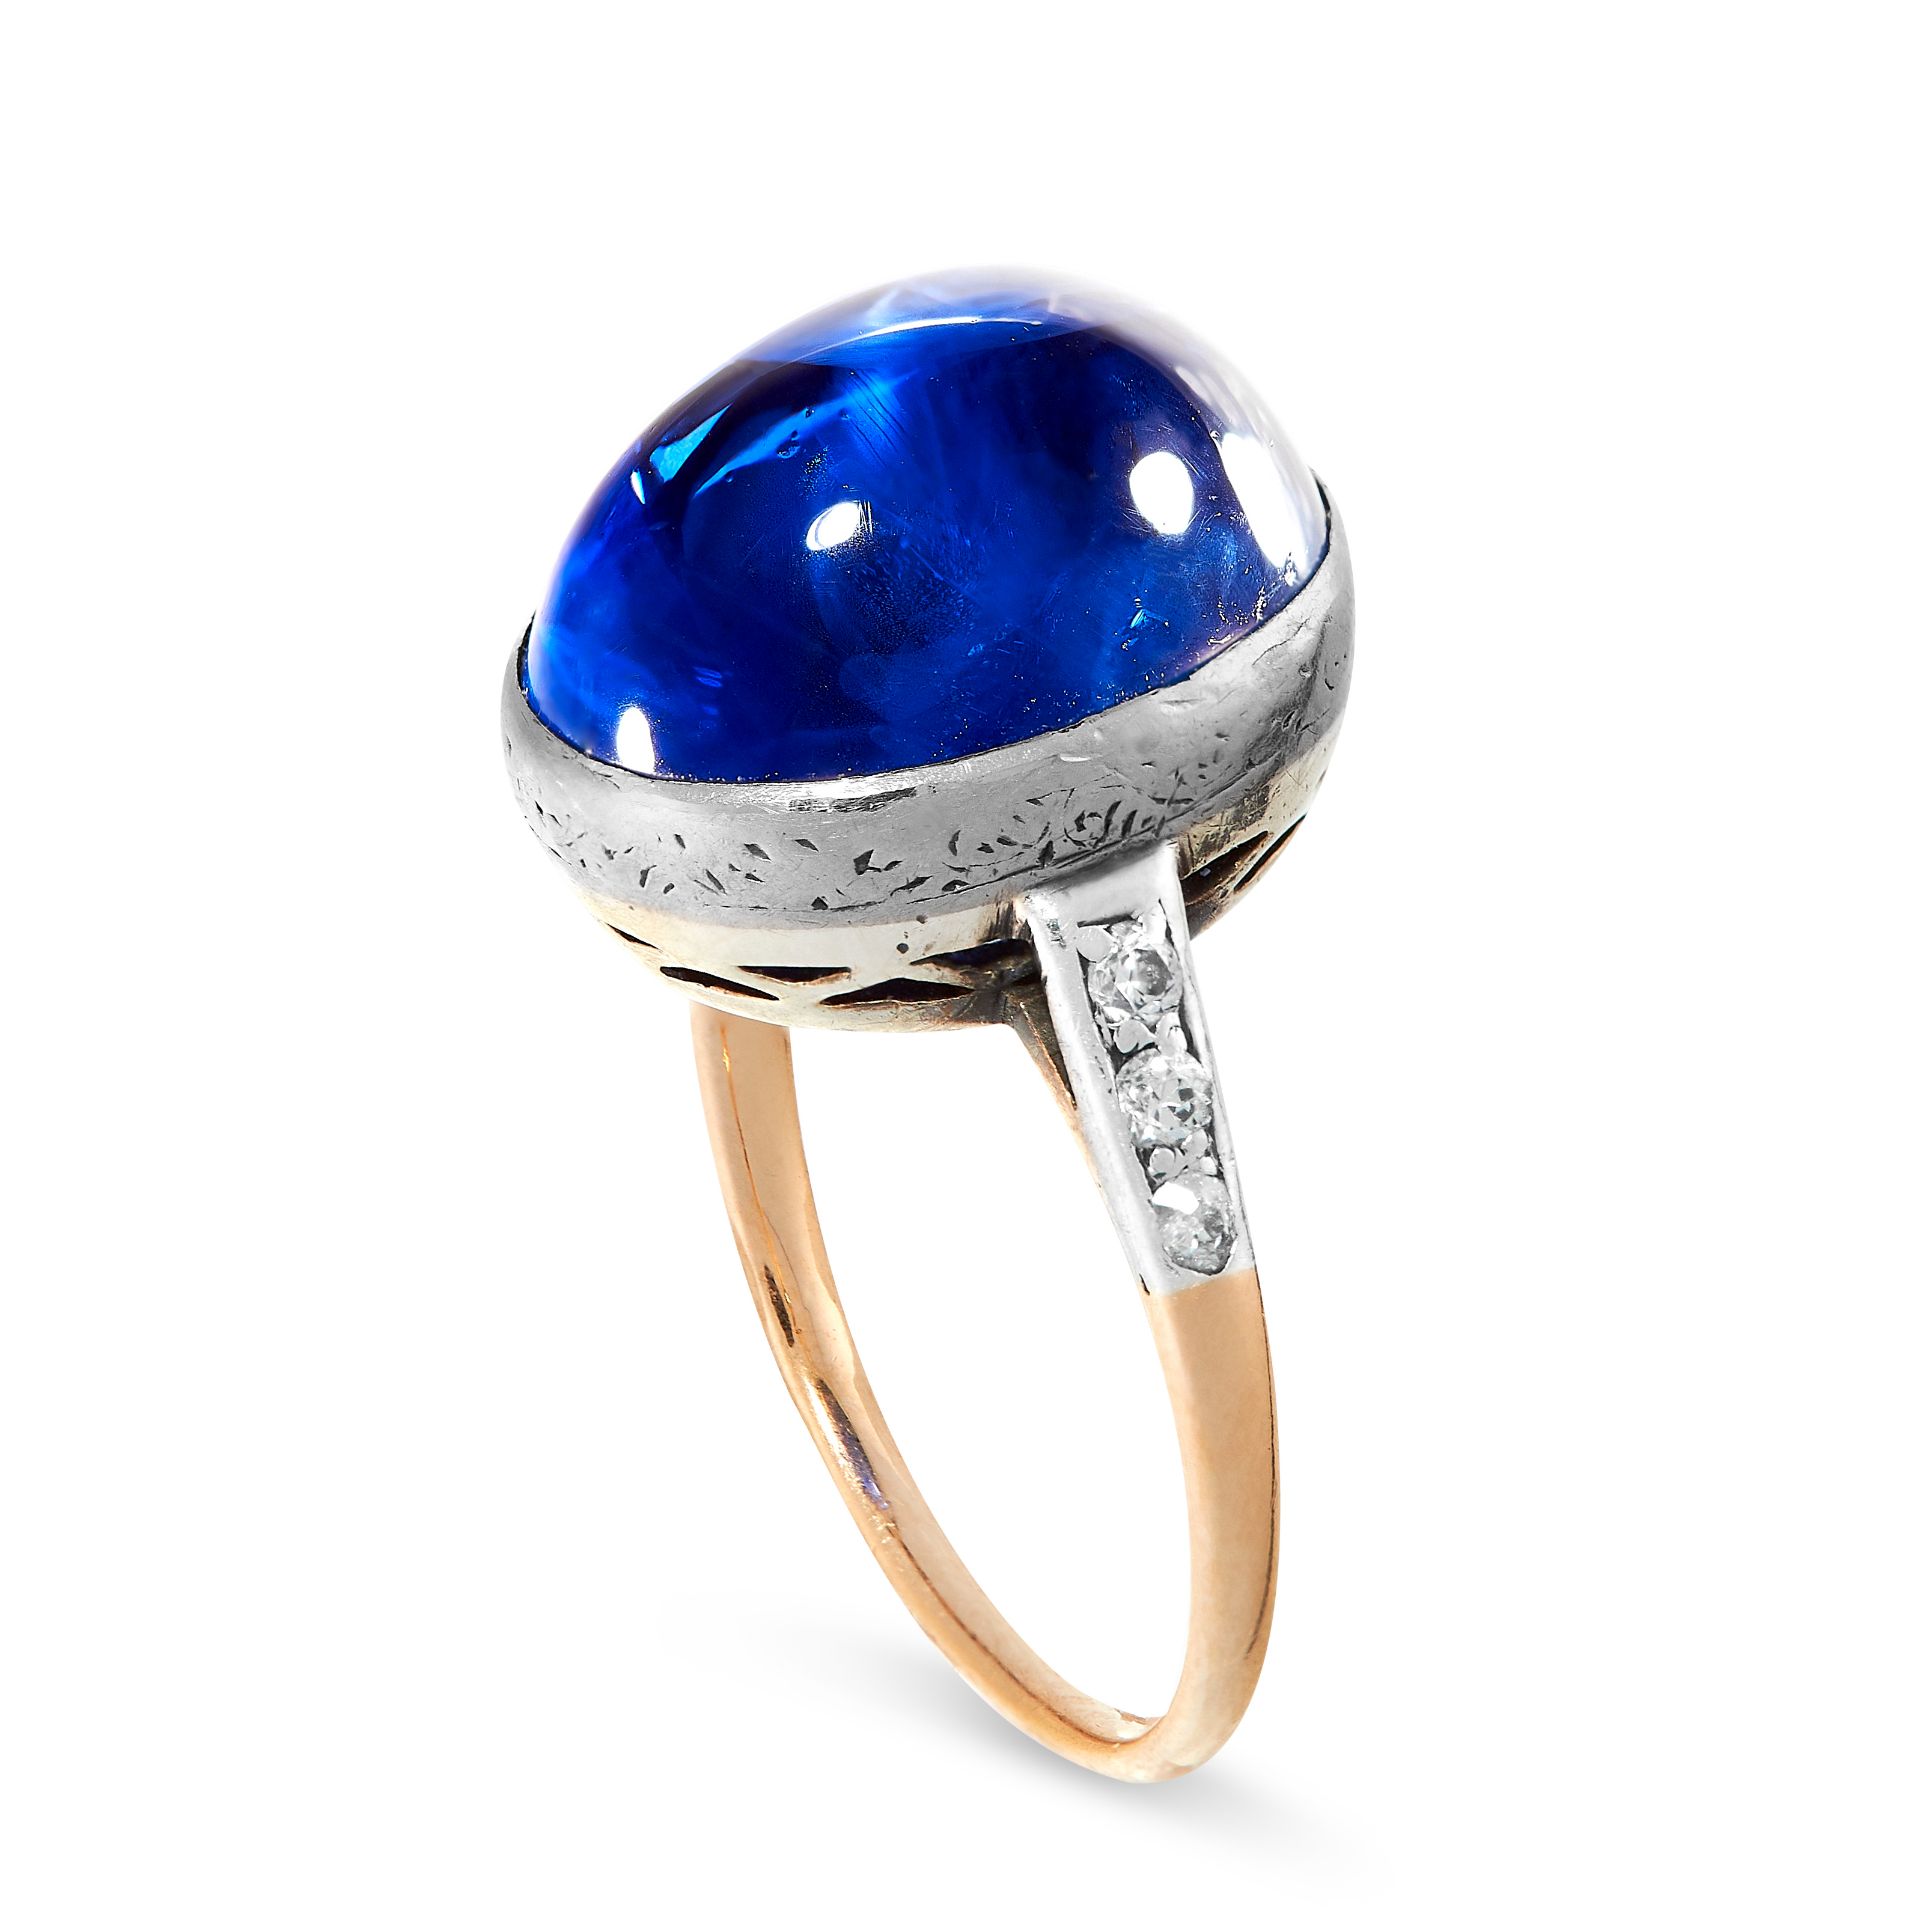 CEYLON NO HEAT SAPPHIRE AND DIAMOND RING collet-set with a cabochon sapphire weighing - Image 2 of 2